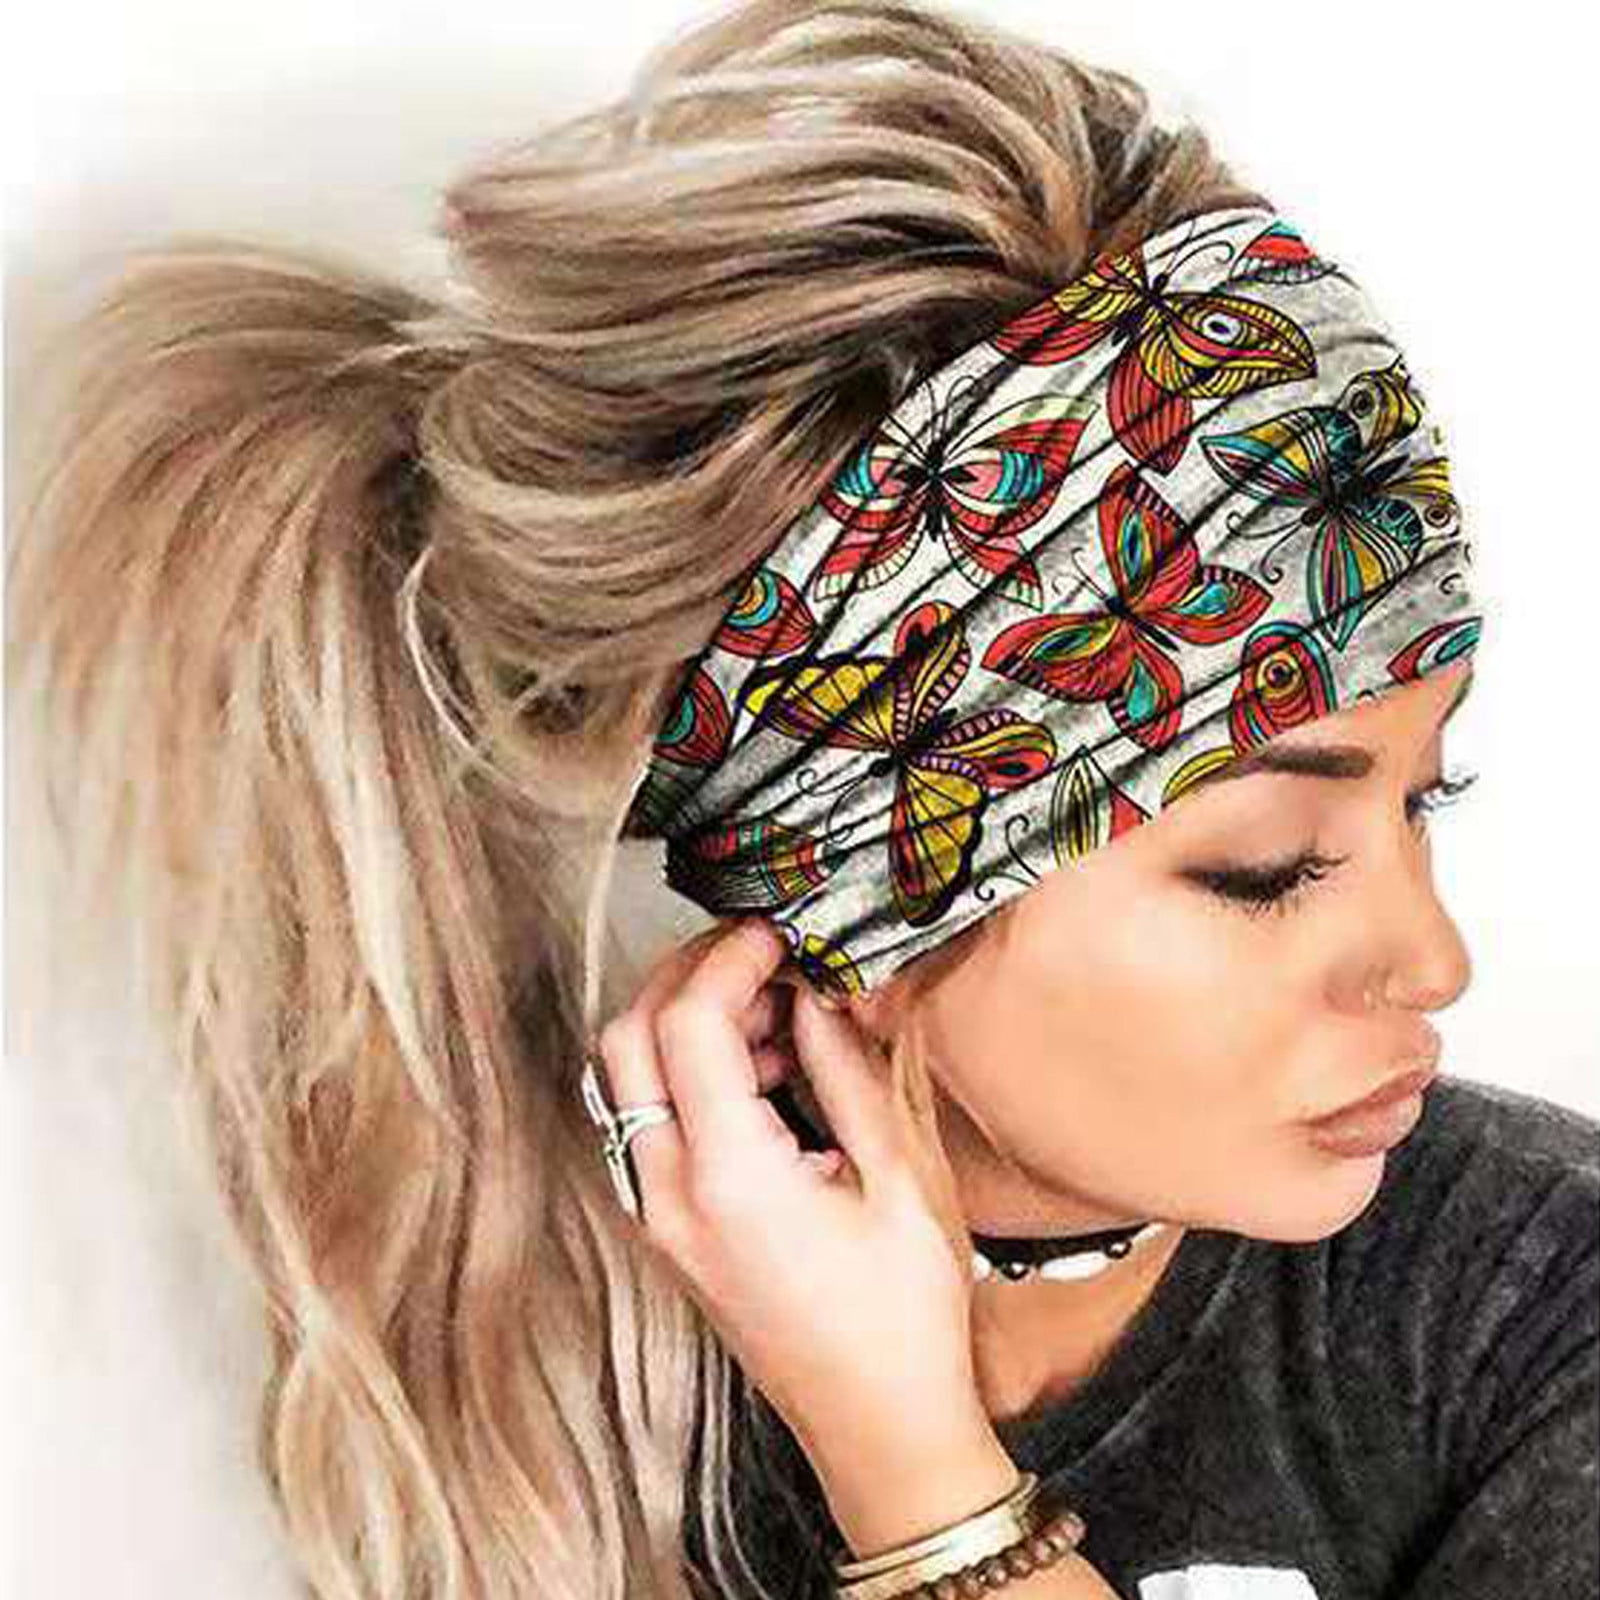 Edge Scarf for Women - Satin Head Wrap for Laying Edges - for Natural Hair  & Wigs - Soft, Stylish & Stays in Place Chains